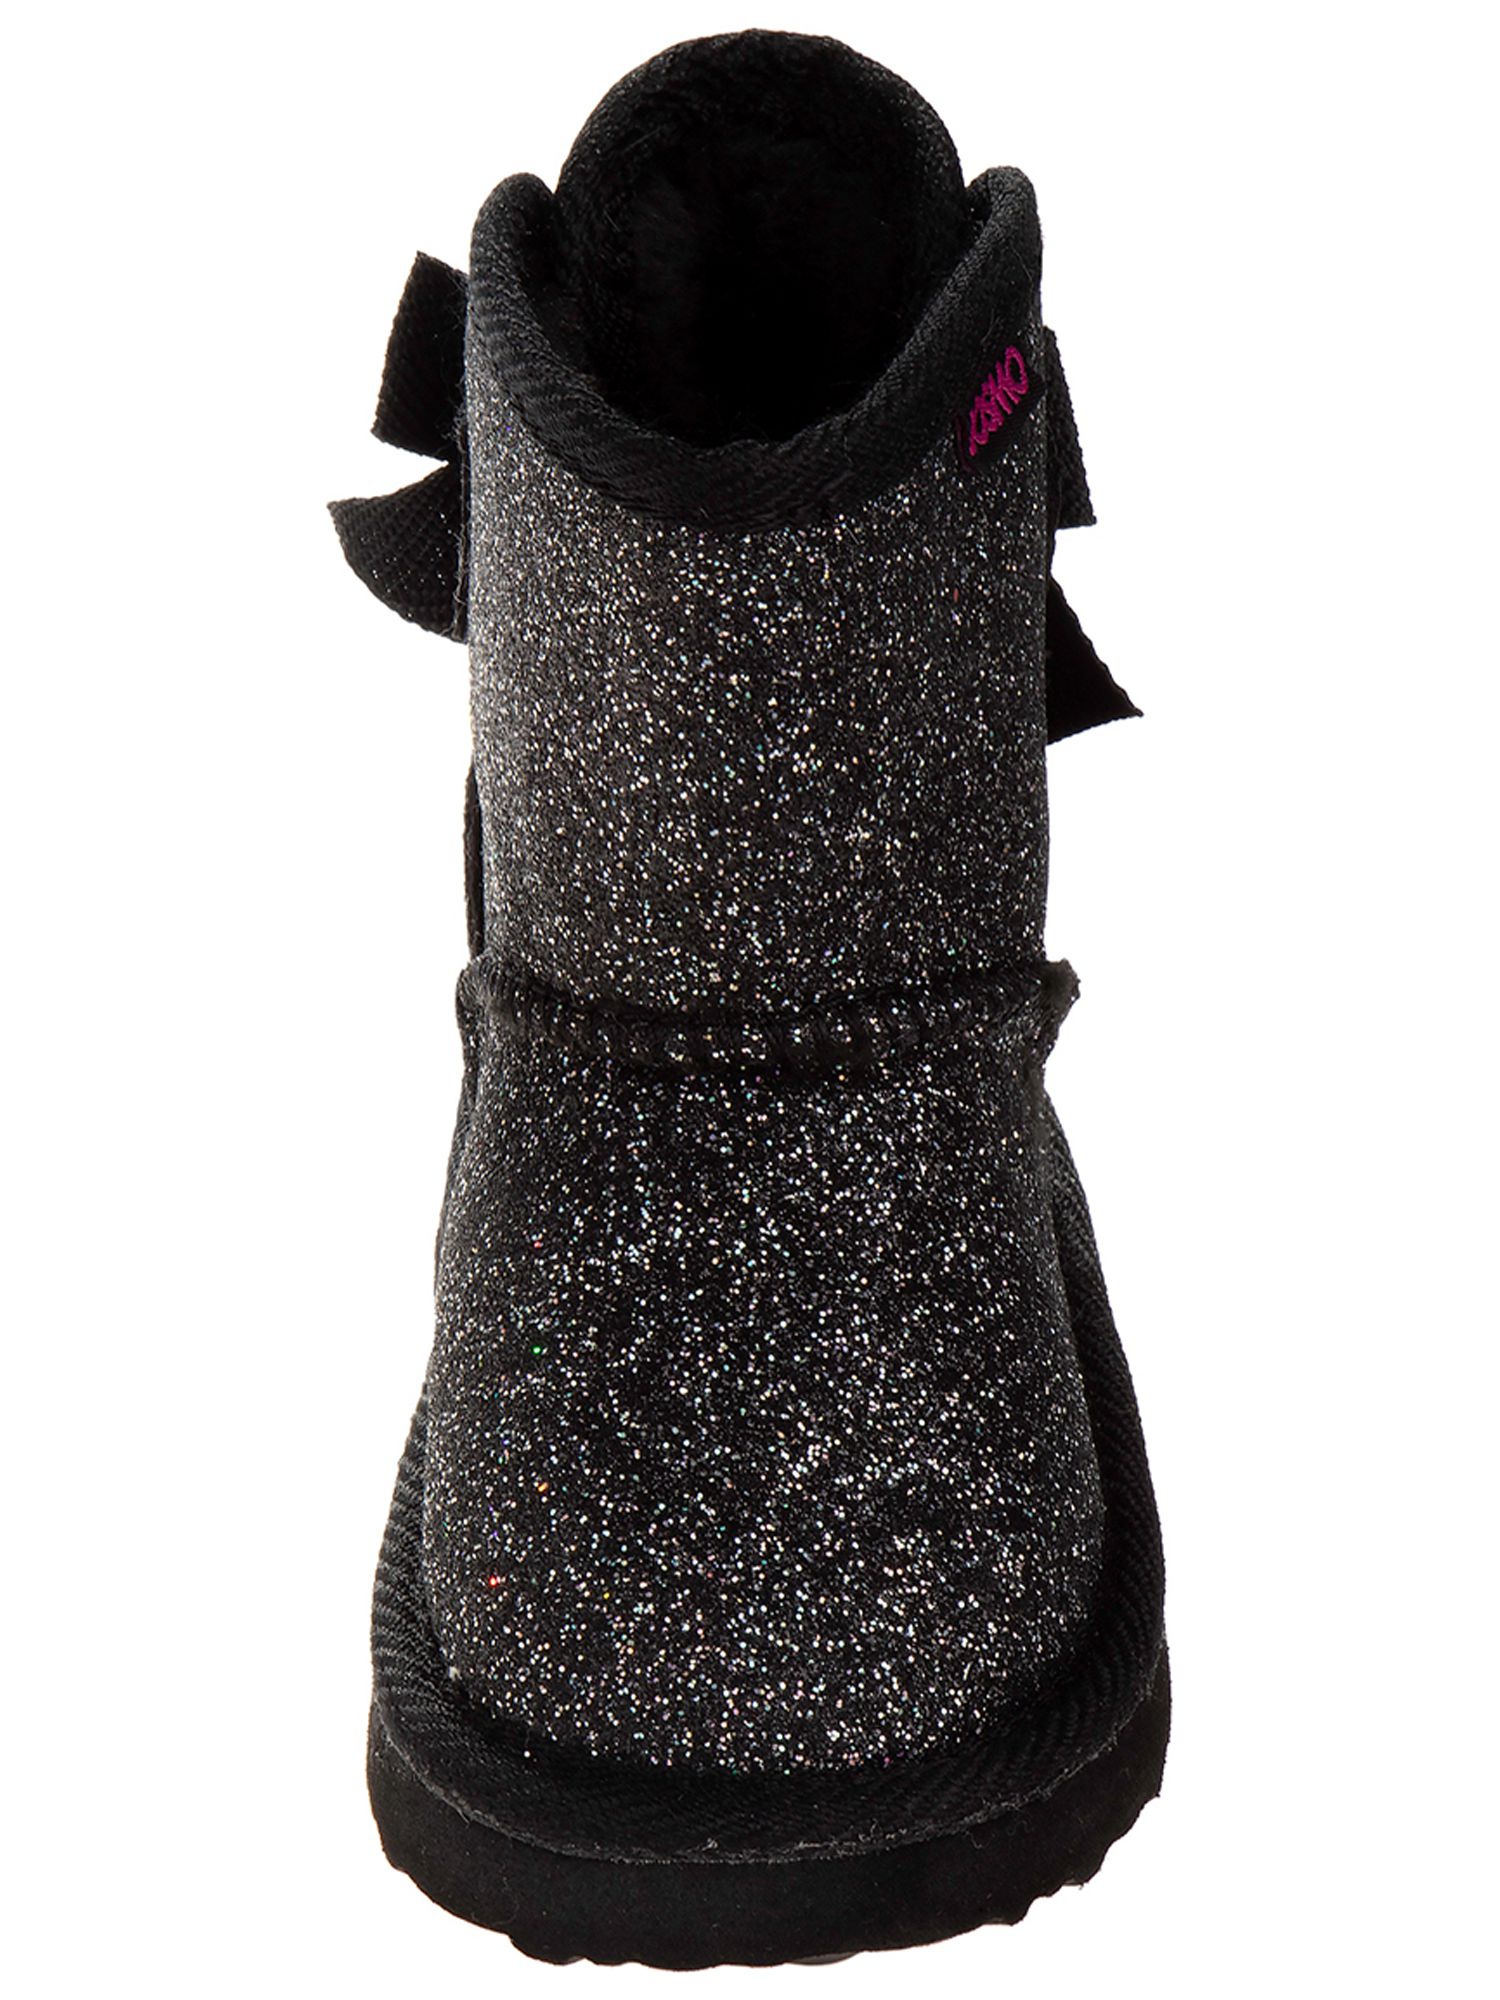 Josmo Glitter & Bows Faux Shearling Ankle Boot (Toddler Girls) - image 5 of 5